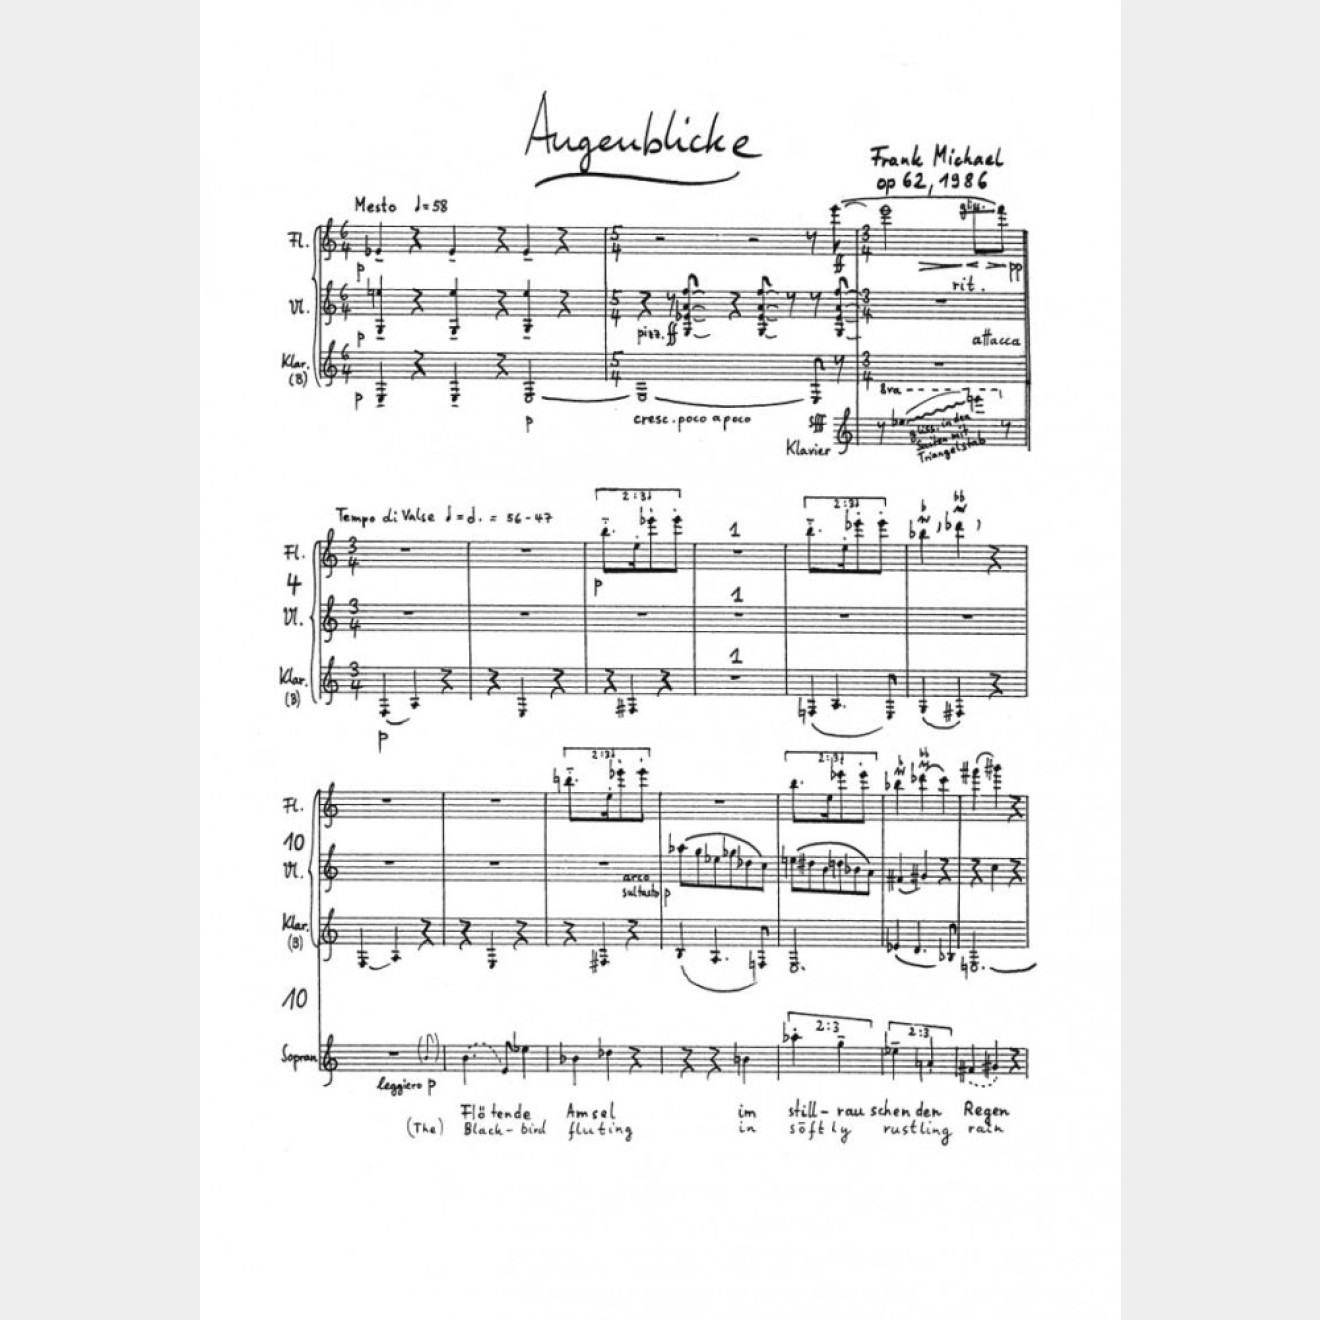 Augenblicke, 14` (Score and Parts)